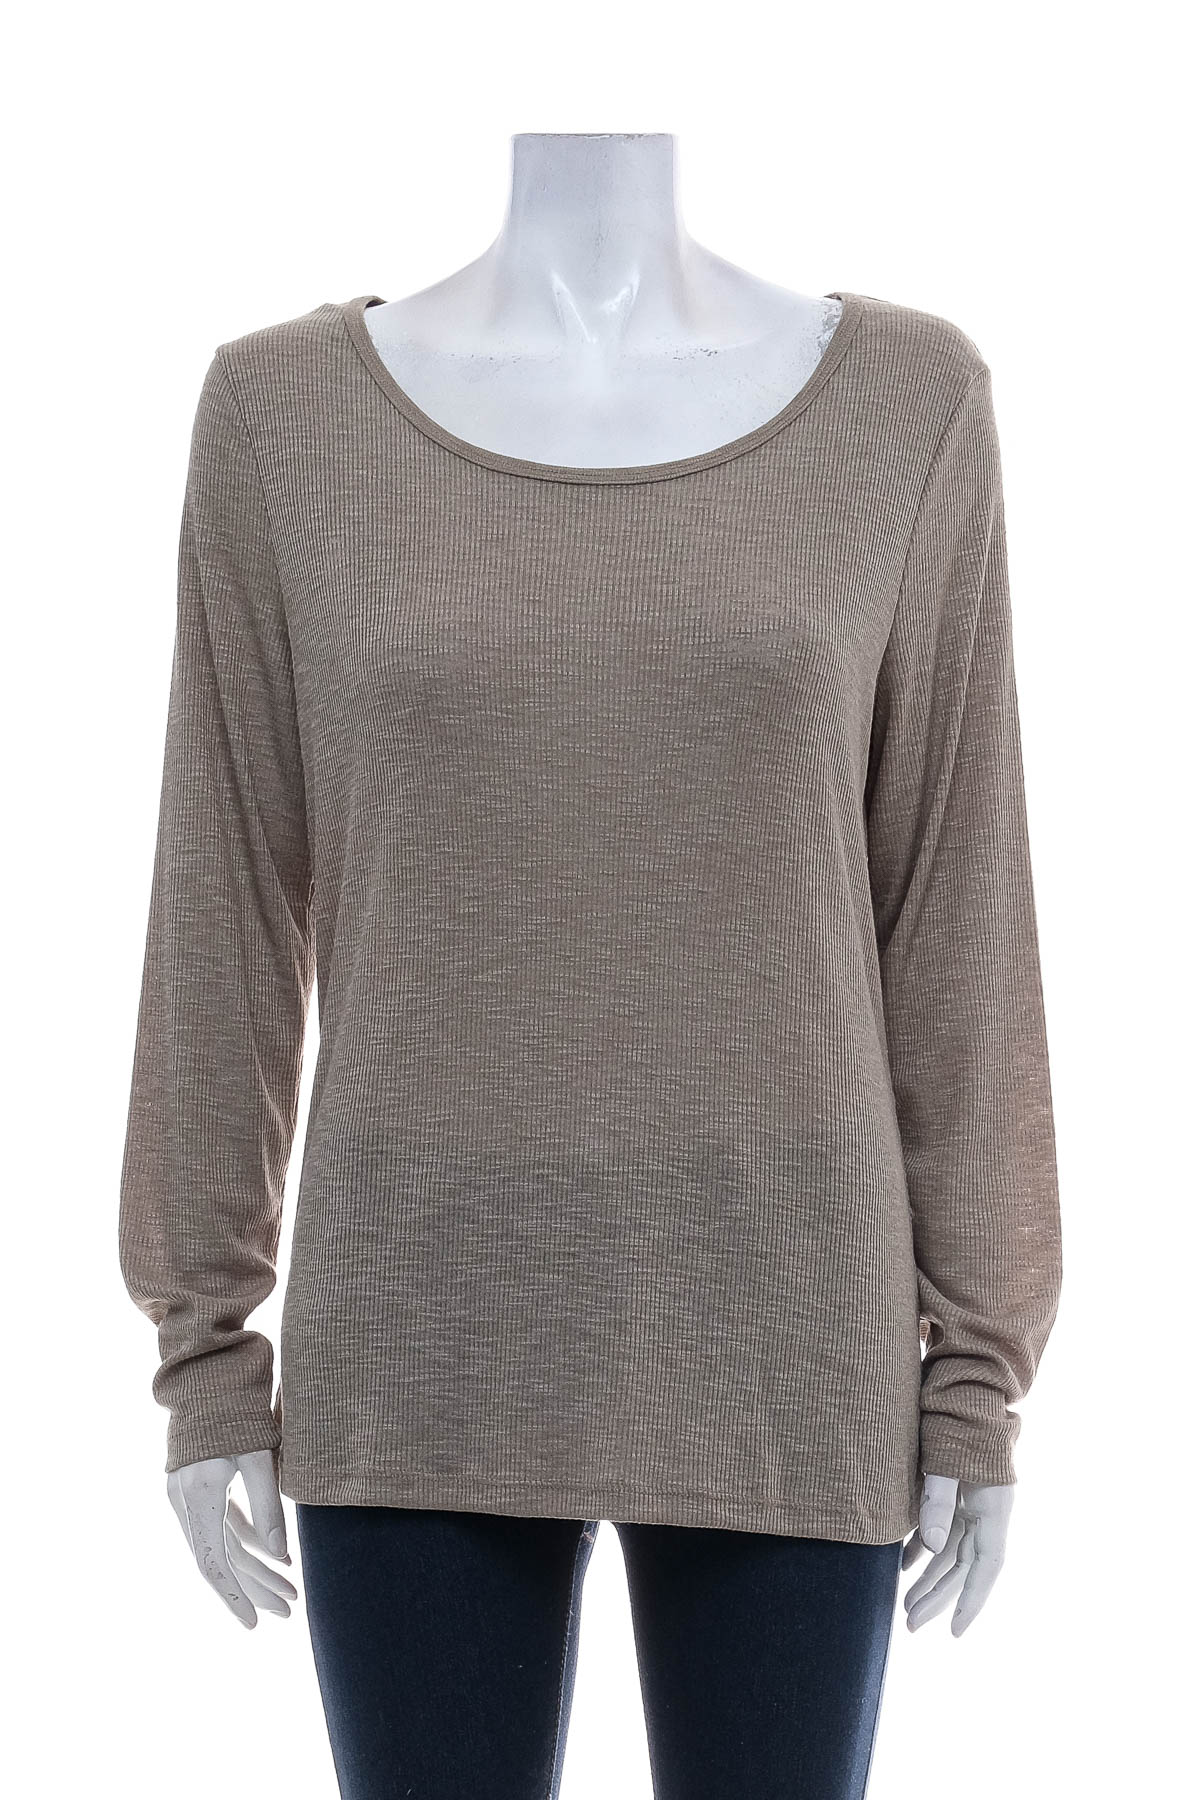 Women's sweater - MOSSIMO SUPPLY CO - 0